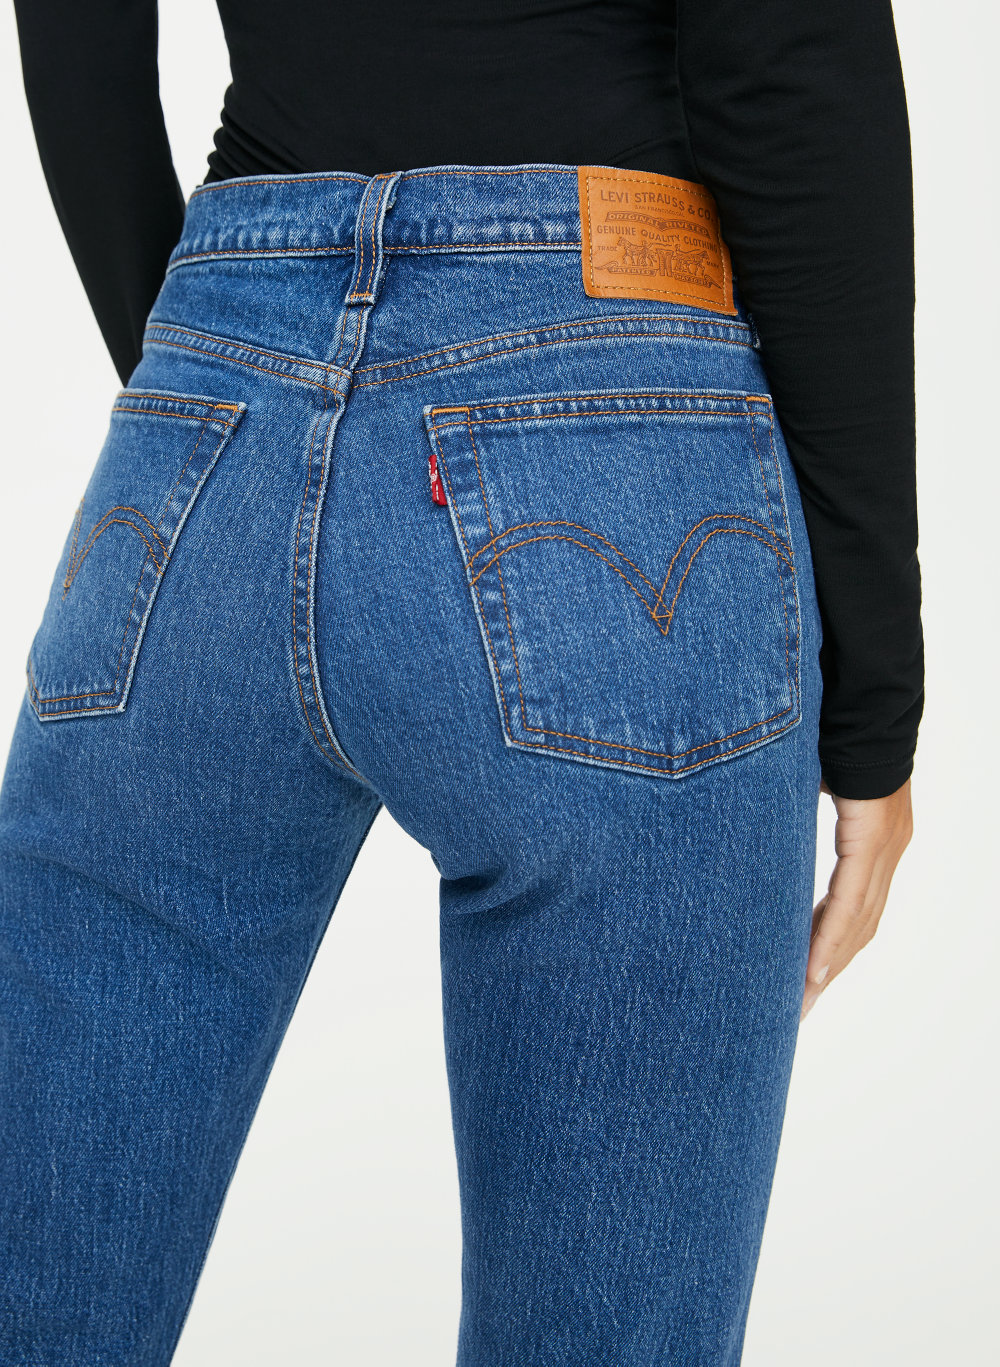 levi's high rise mom jeans